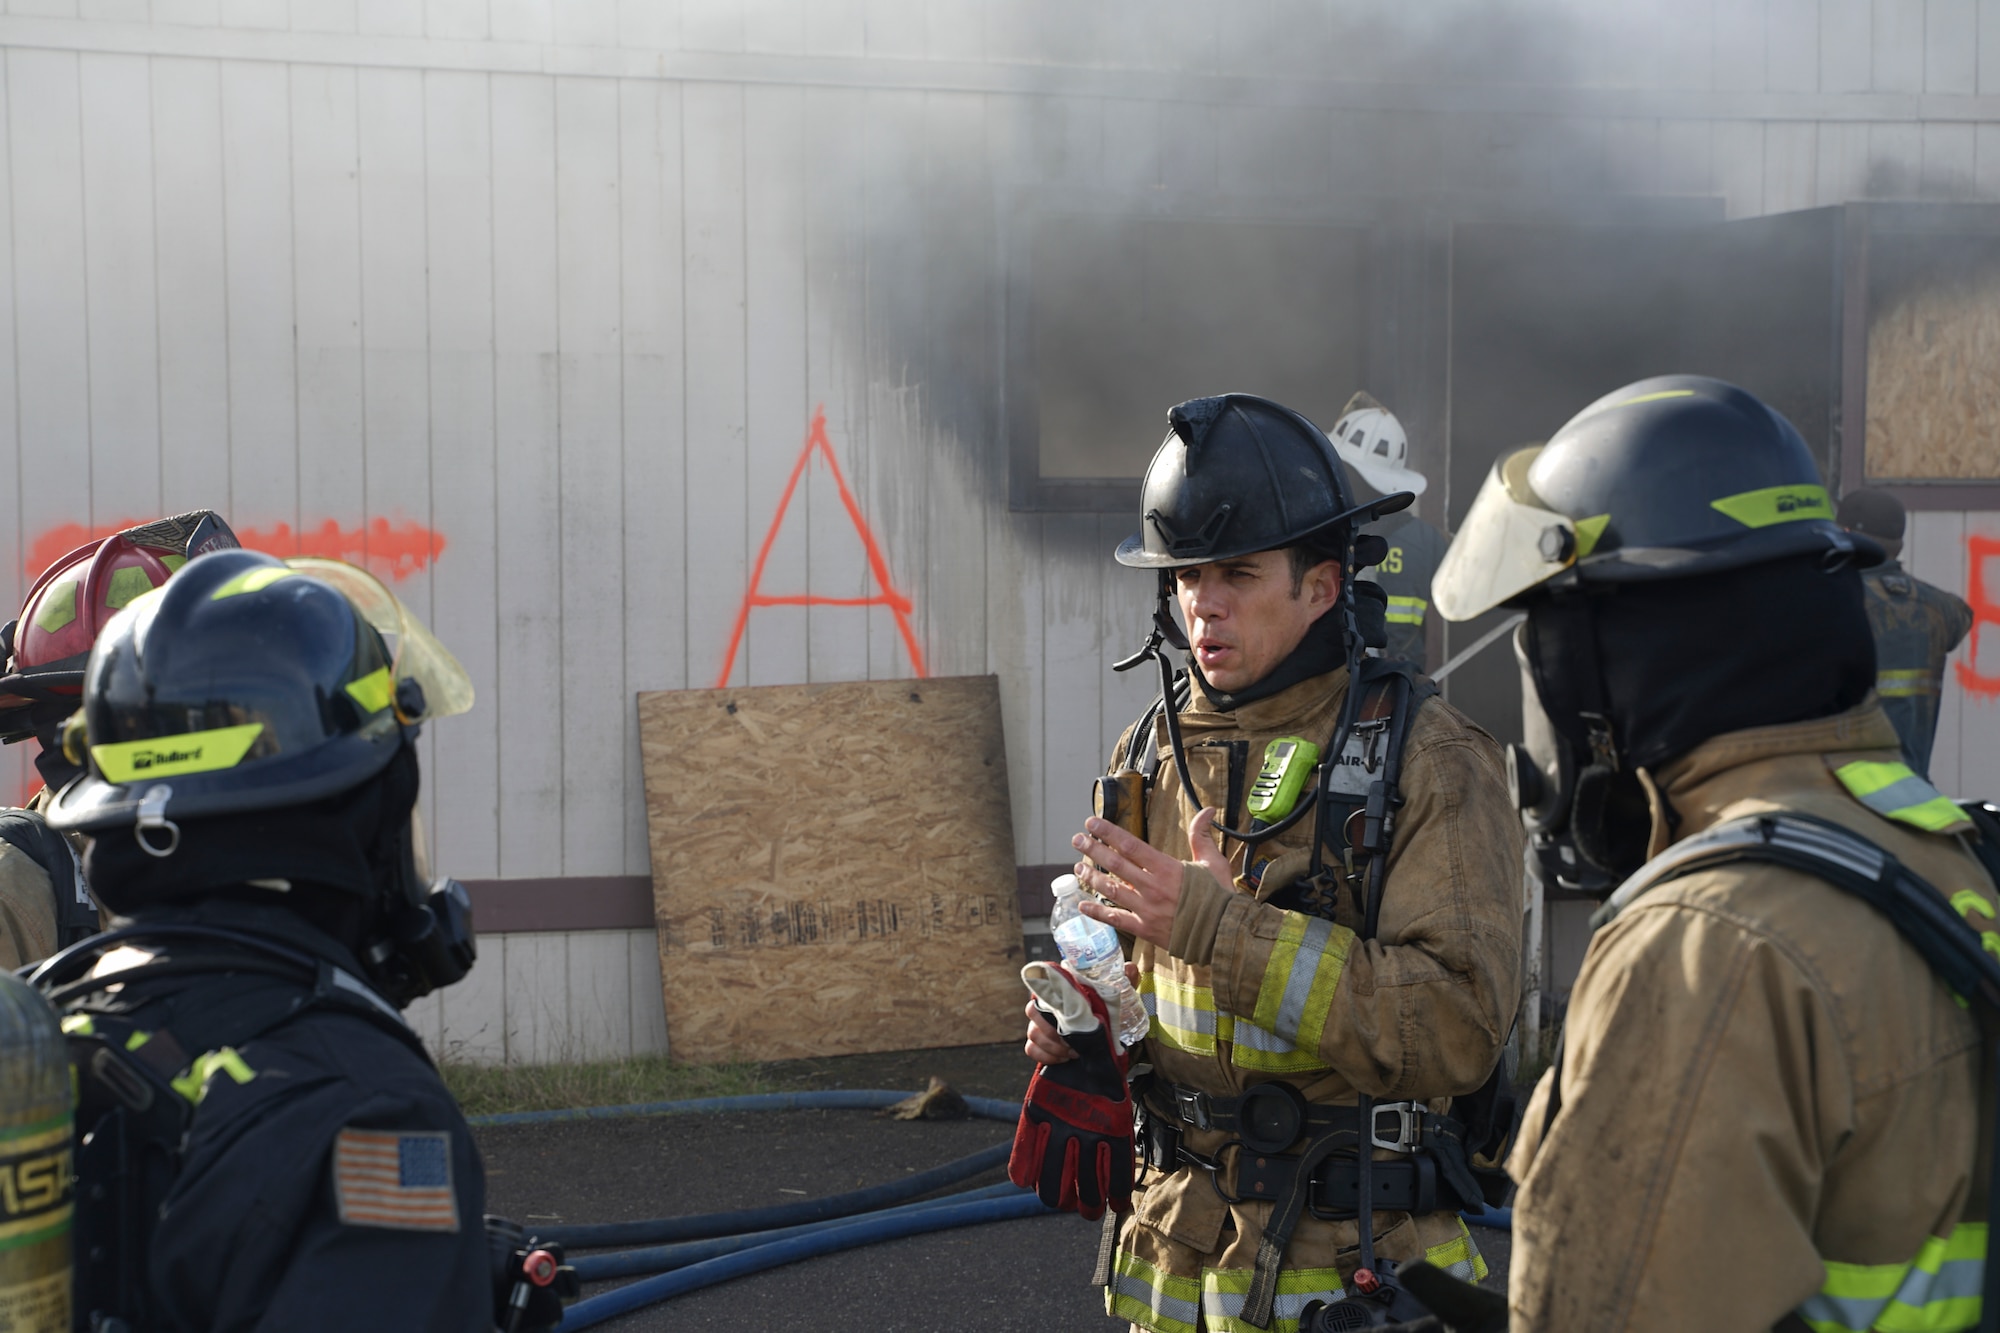 Arturo Perez, center, San Ramon Valley Fire Department instructor, instructs Airmen from the 60th Civil Engineer Squadron during a live burn training at Travis Air Force Base, California, Jan. 14, 2020. Travis Fire Emergency services and 10 other fire departments used four buildings at Travis AFB for live-fire training before conducting a final controlled burn to remove them. (Courtesy photo)